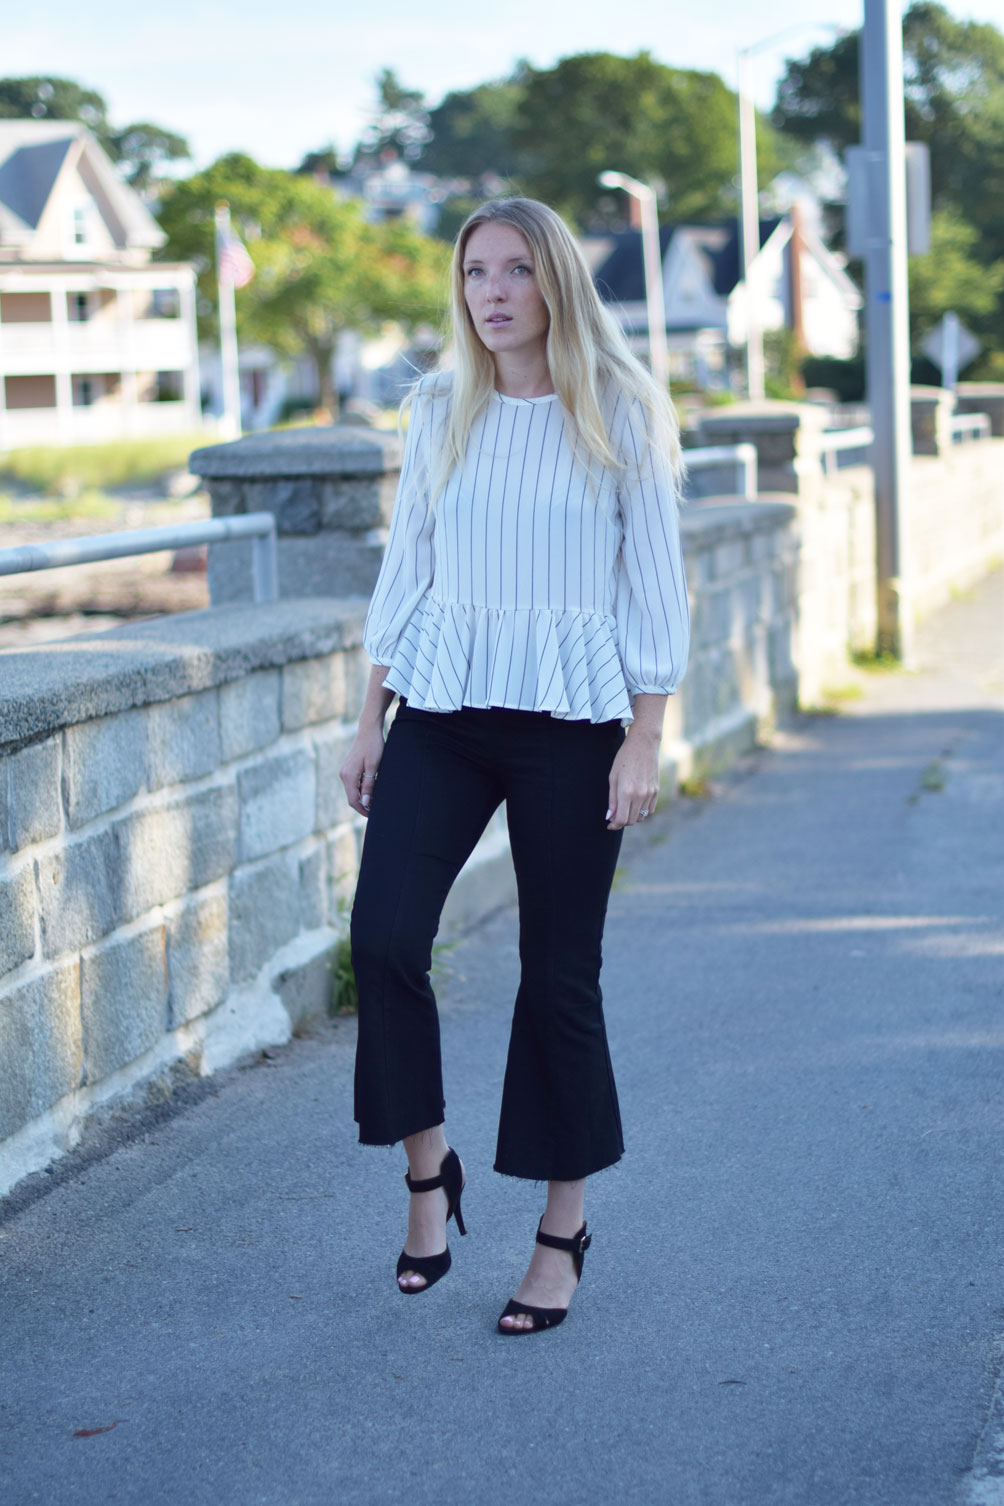 early fall style from Leslie Musser of one brass fox with this ruffle stripe shirt, cropped flare jeans, and black suede sandals